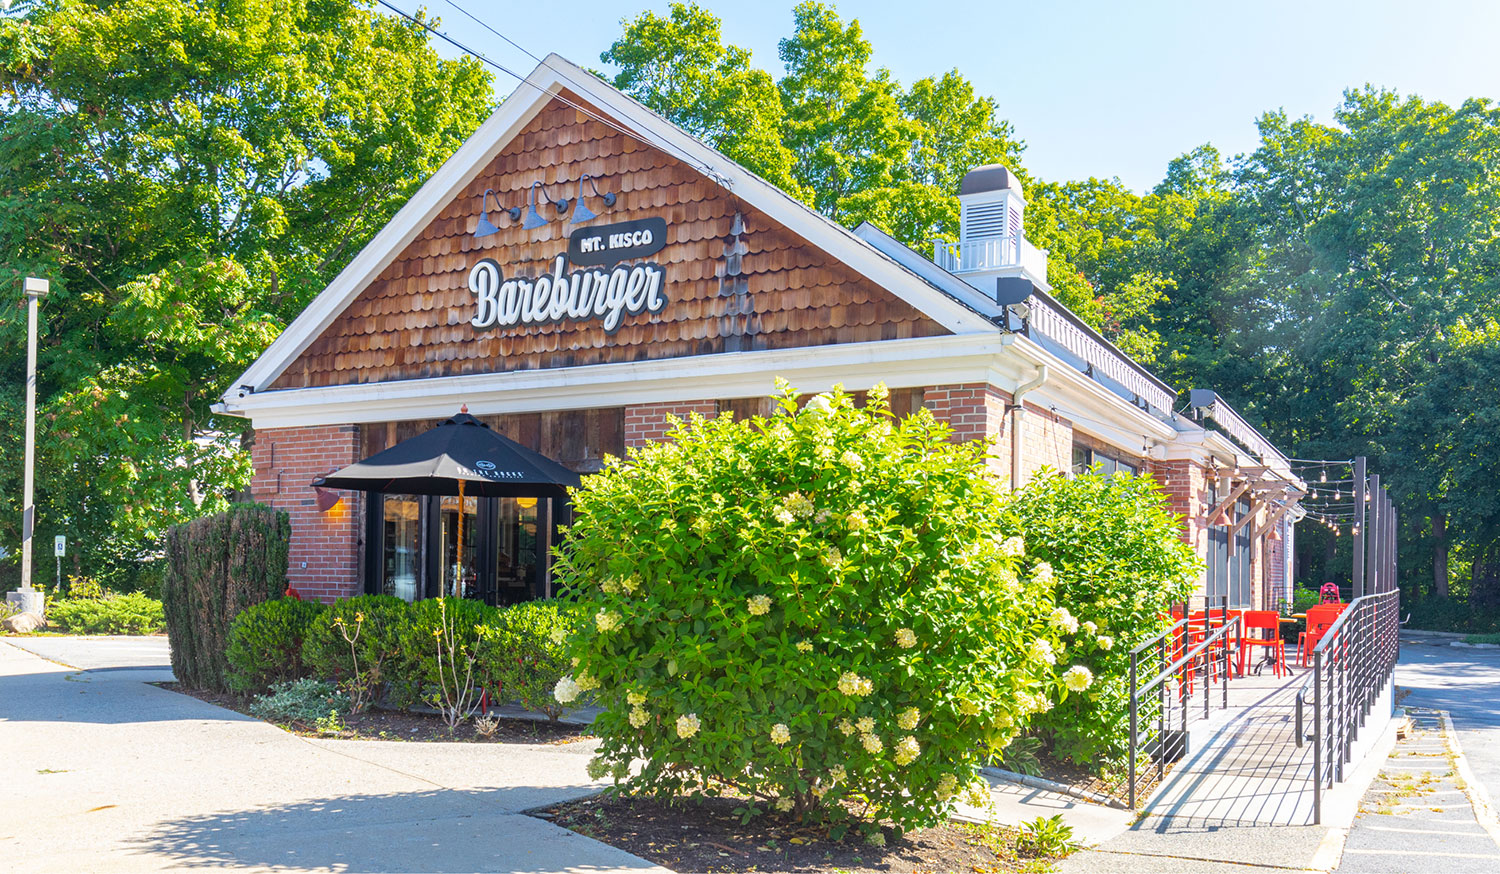 Bareburger Has The Best Burger In Mt. Kisco Offering Up Wagyu Organic Grass Fed Beef Burgers And More 